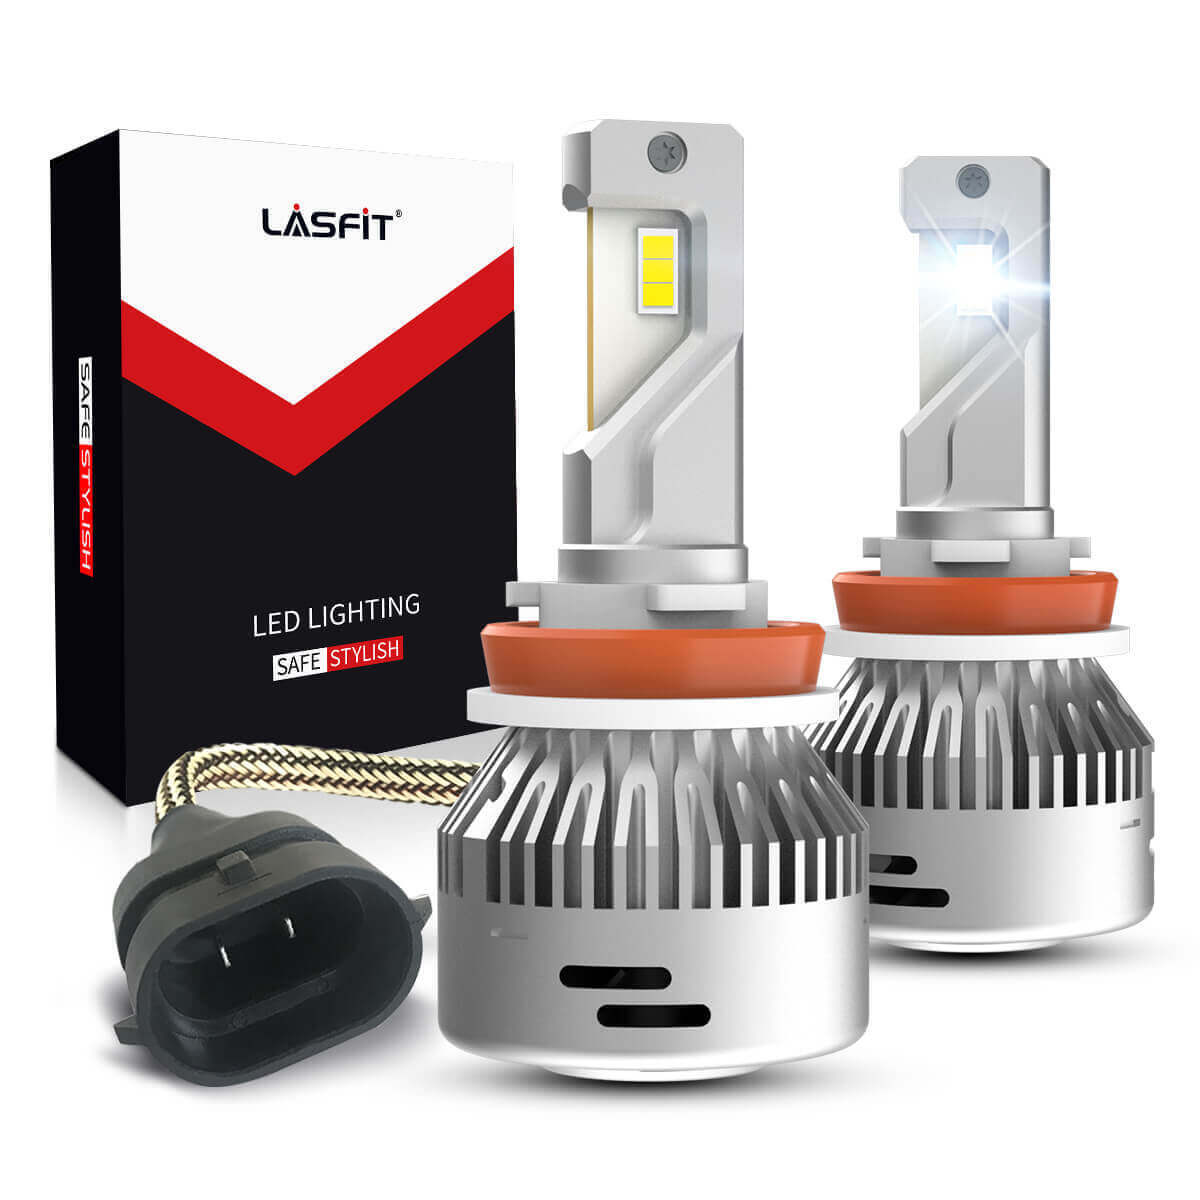 Lasfit H11 H9 H8 H16 LED Headlight Bulb Low Beam Halogen Replace Bright 6000LM